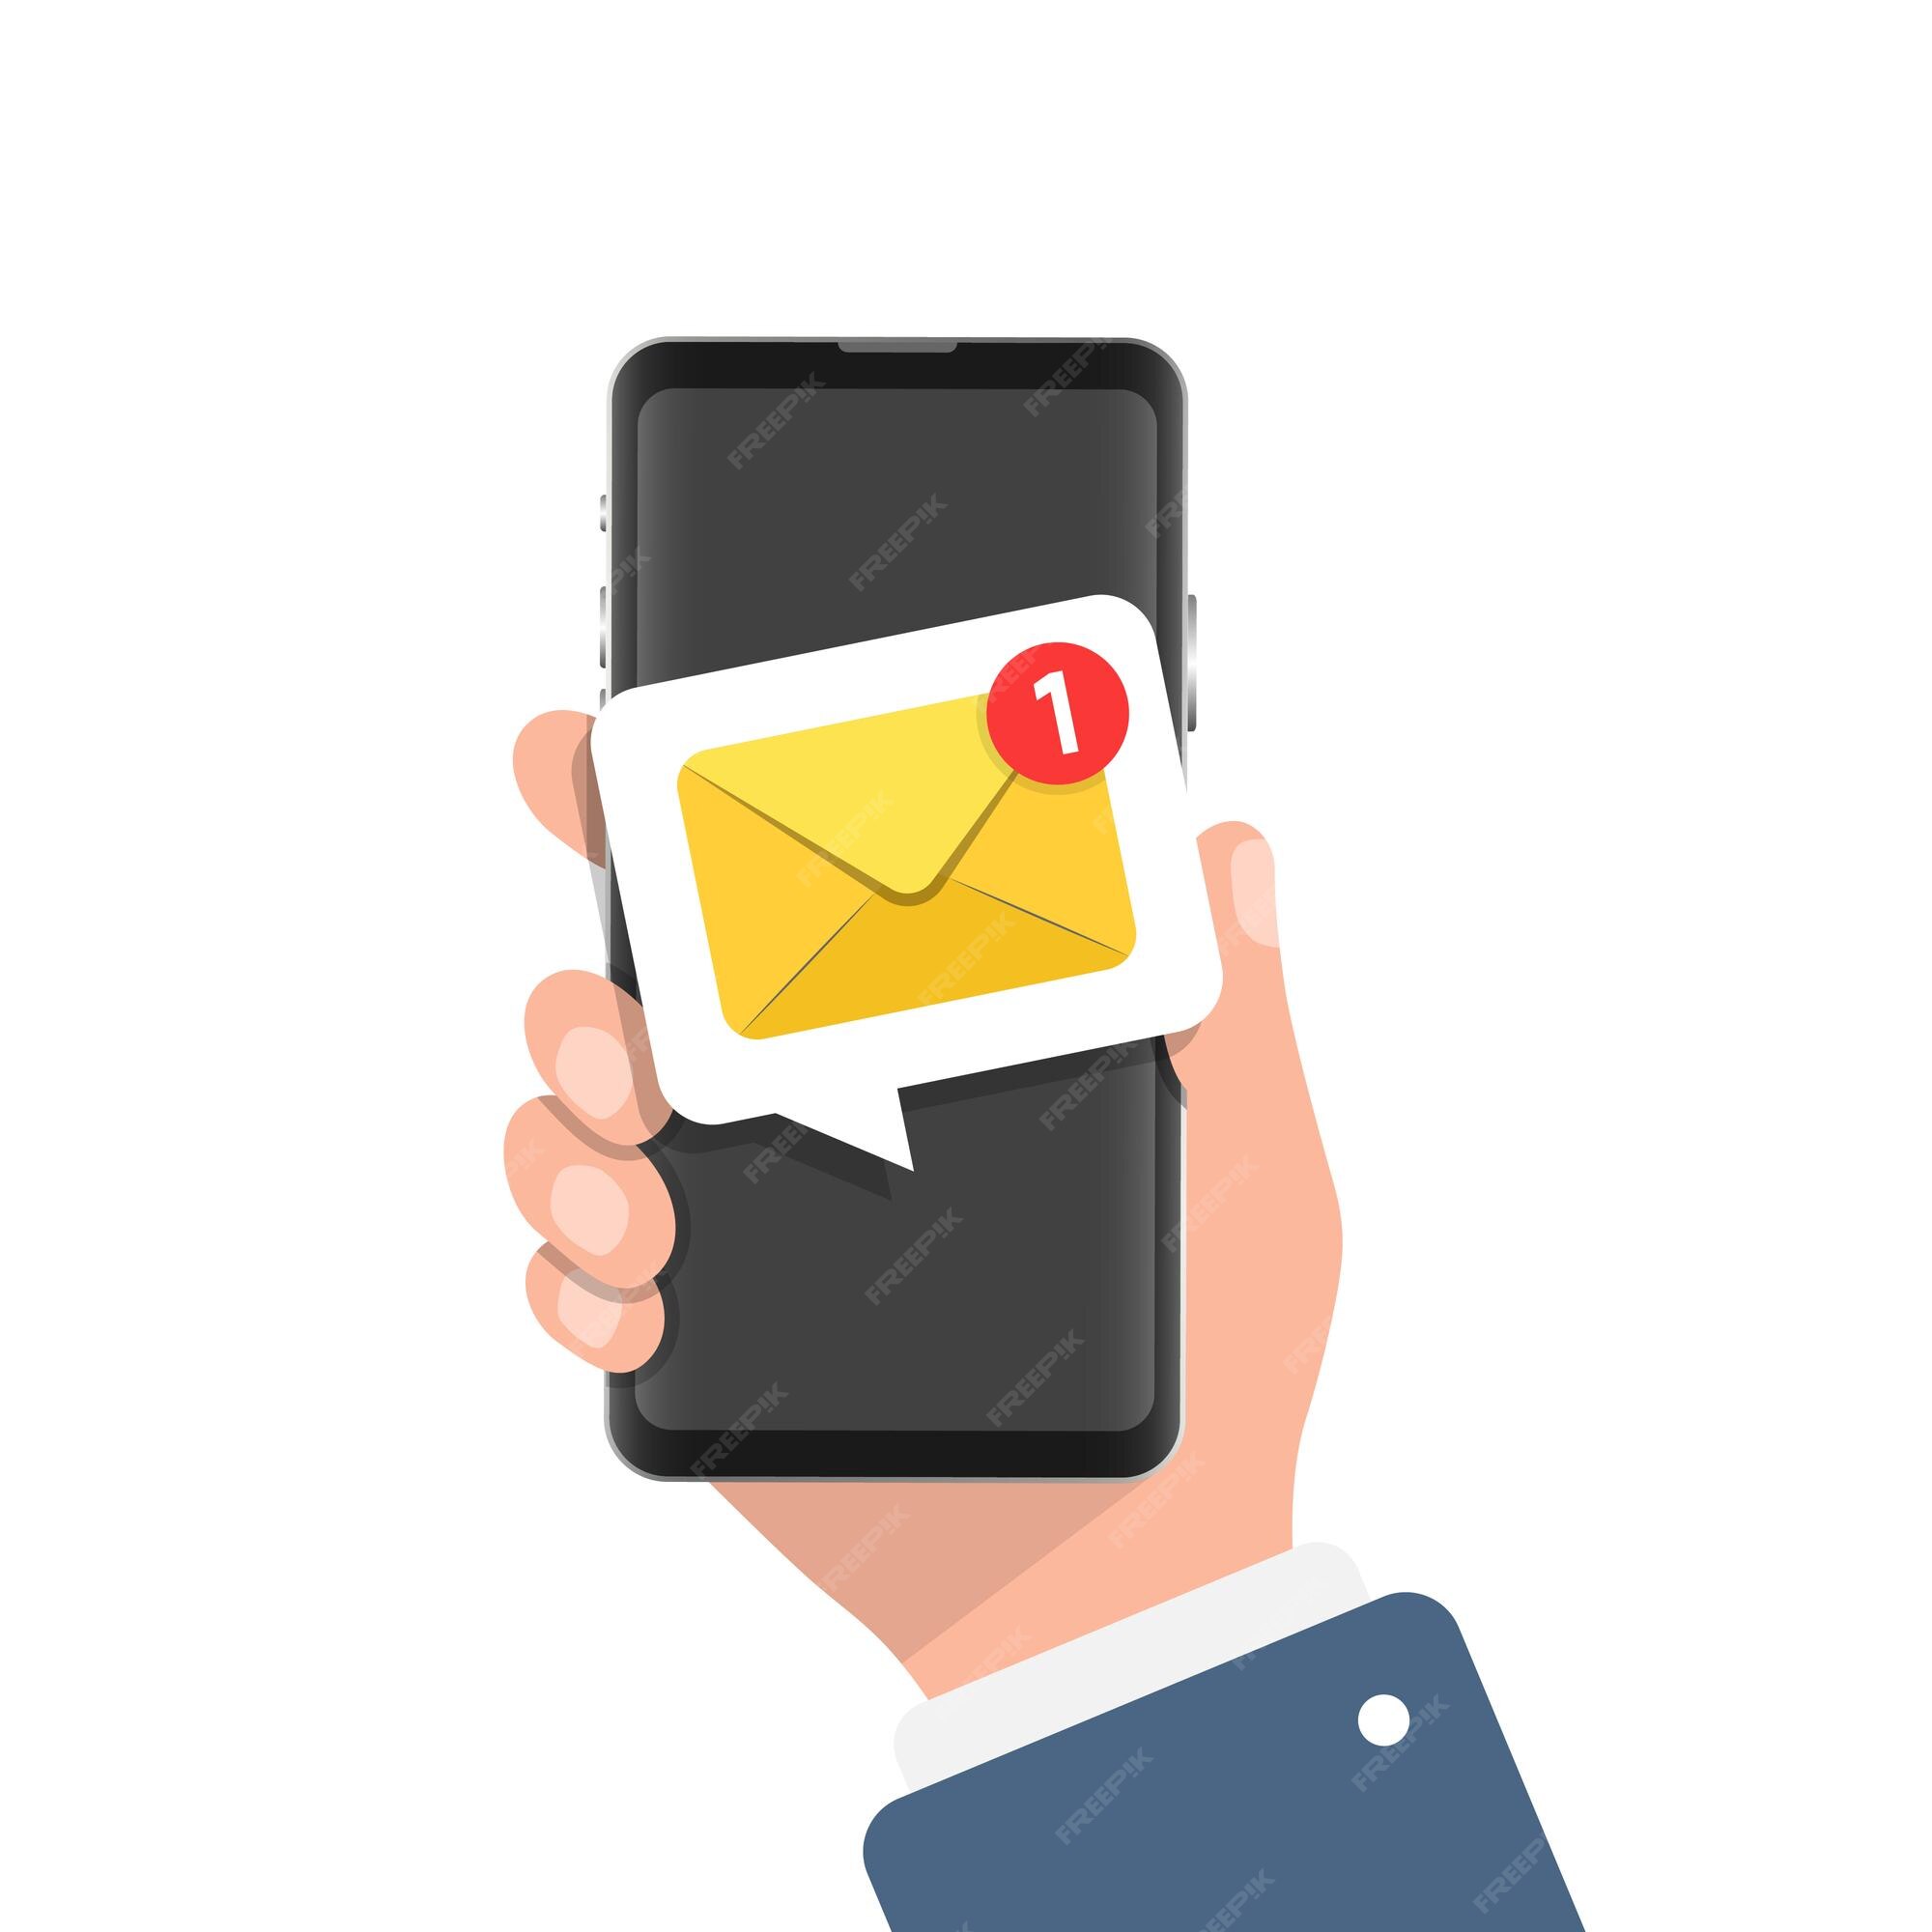 https://img.freepik.com/premium-vector/hand-holding-smartphone-icon-flat-style-incoming-message-vector-illustration-isolated-background-email-notification-sign-business-concept_157943-5250.jpg?w=2000